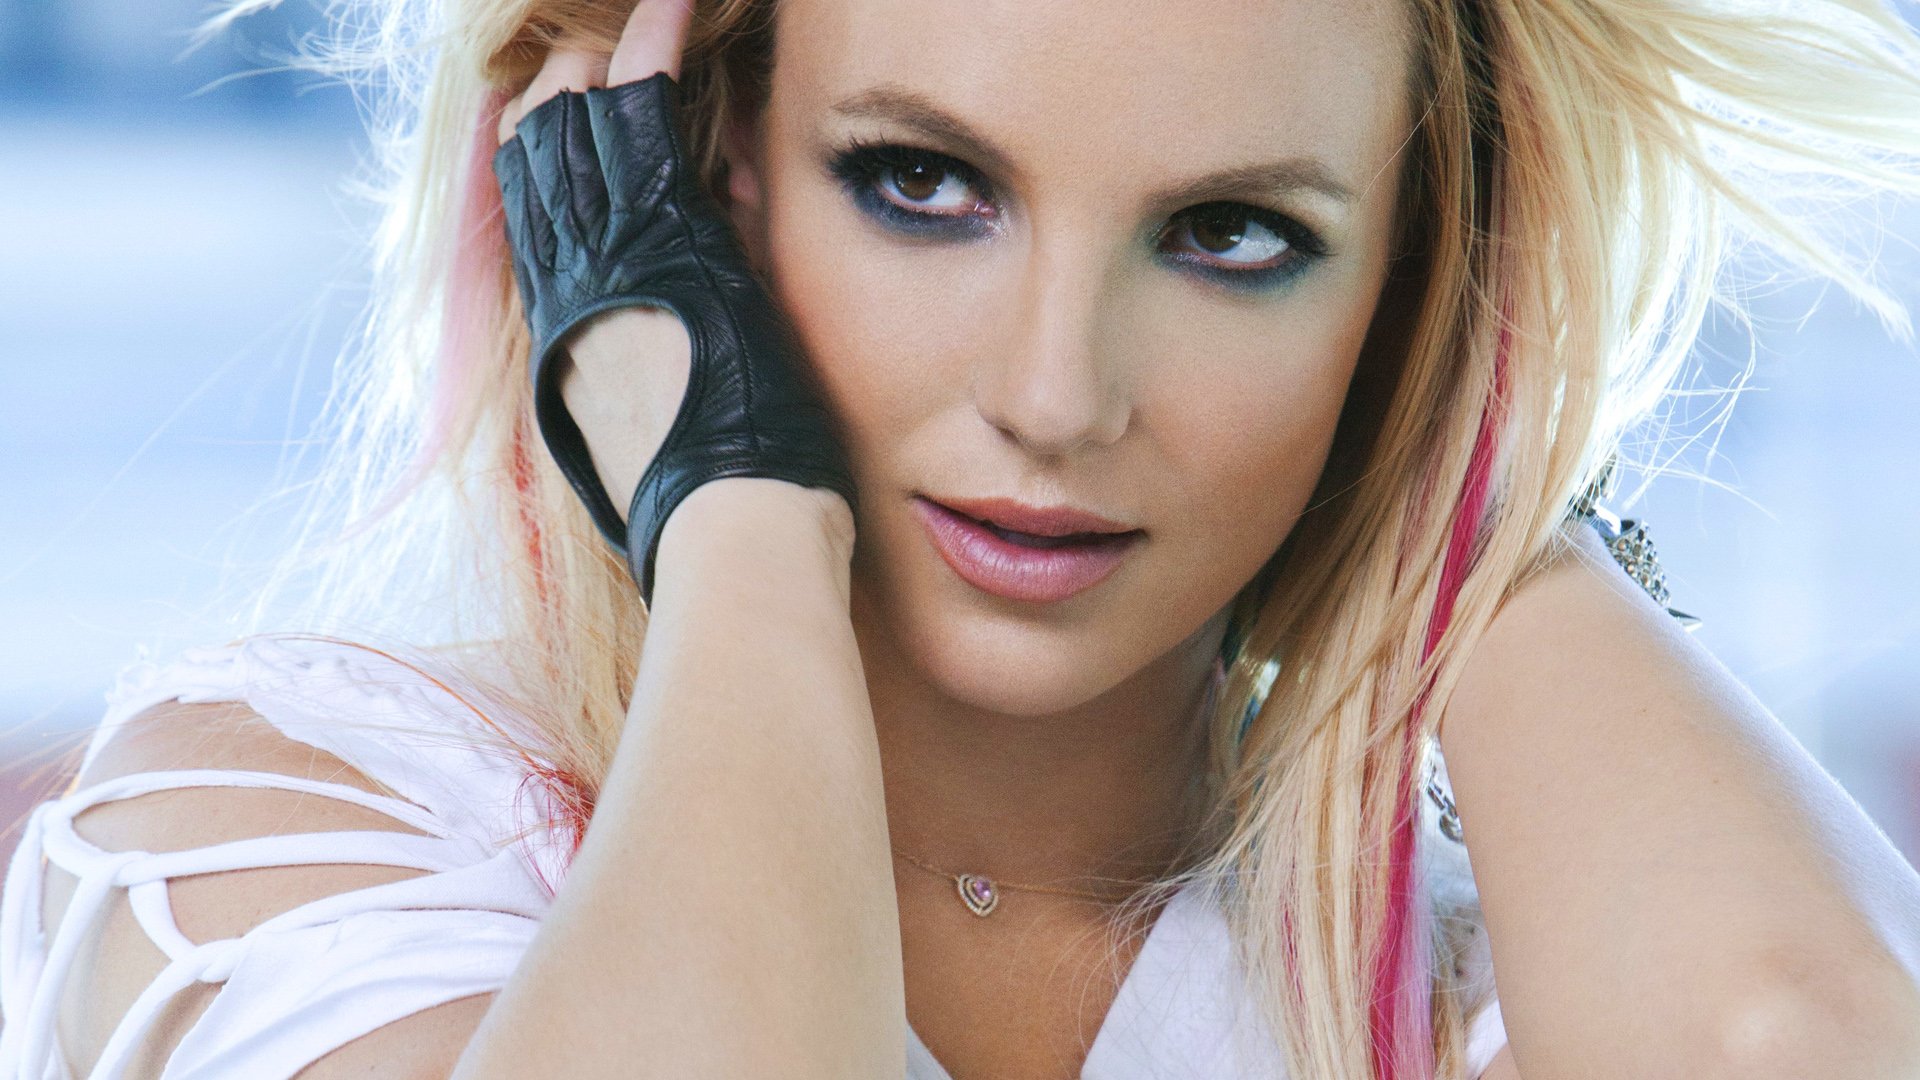 Britney Spears Full Hd Wallpaper And Background Image 1920x1080 Id522040 0913